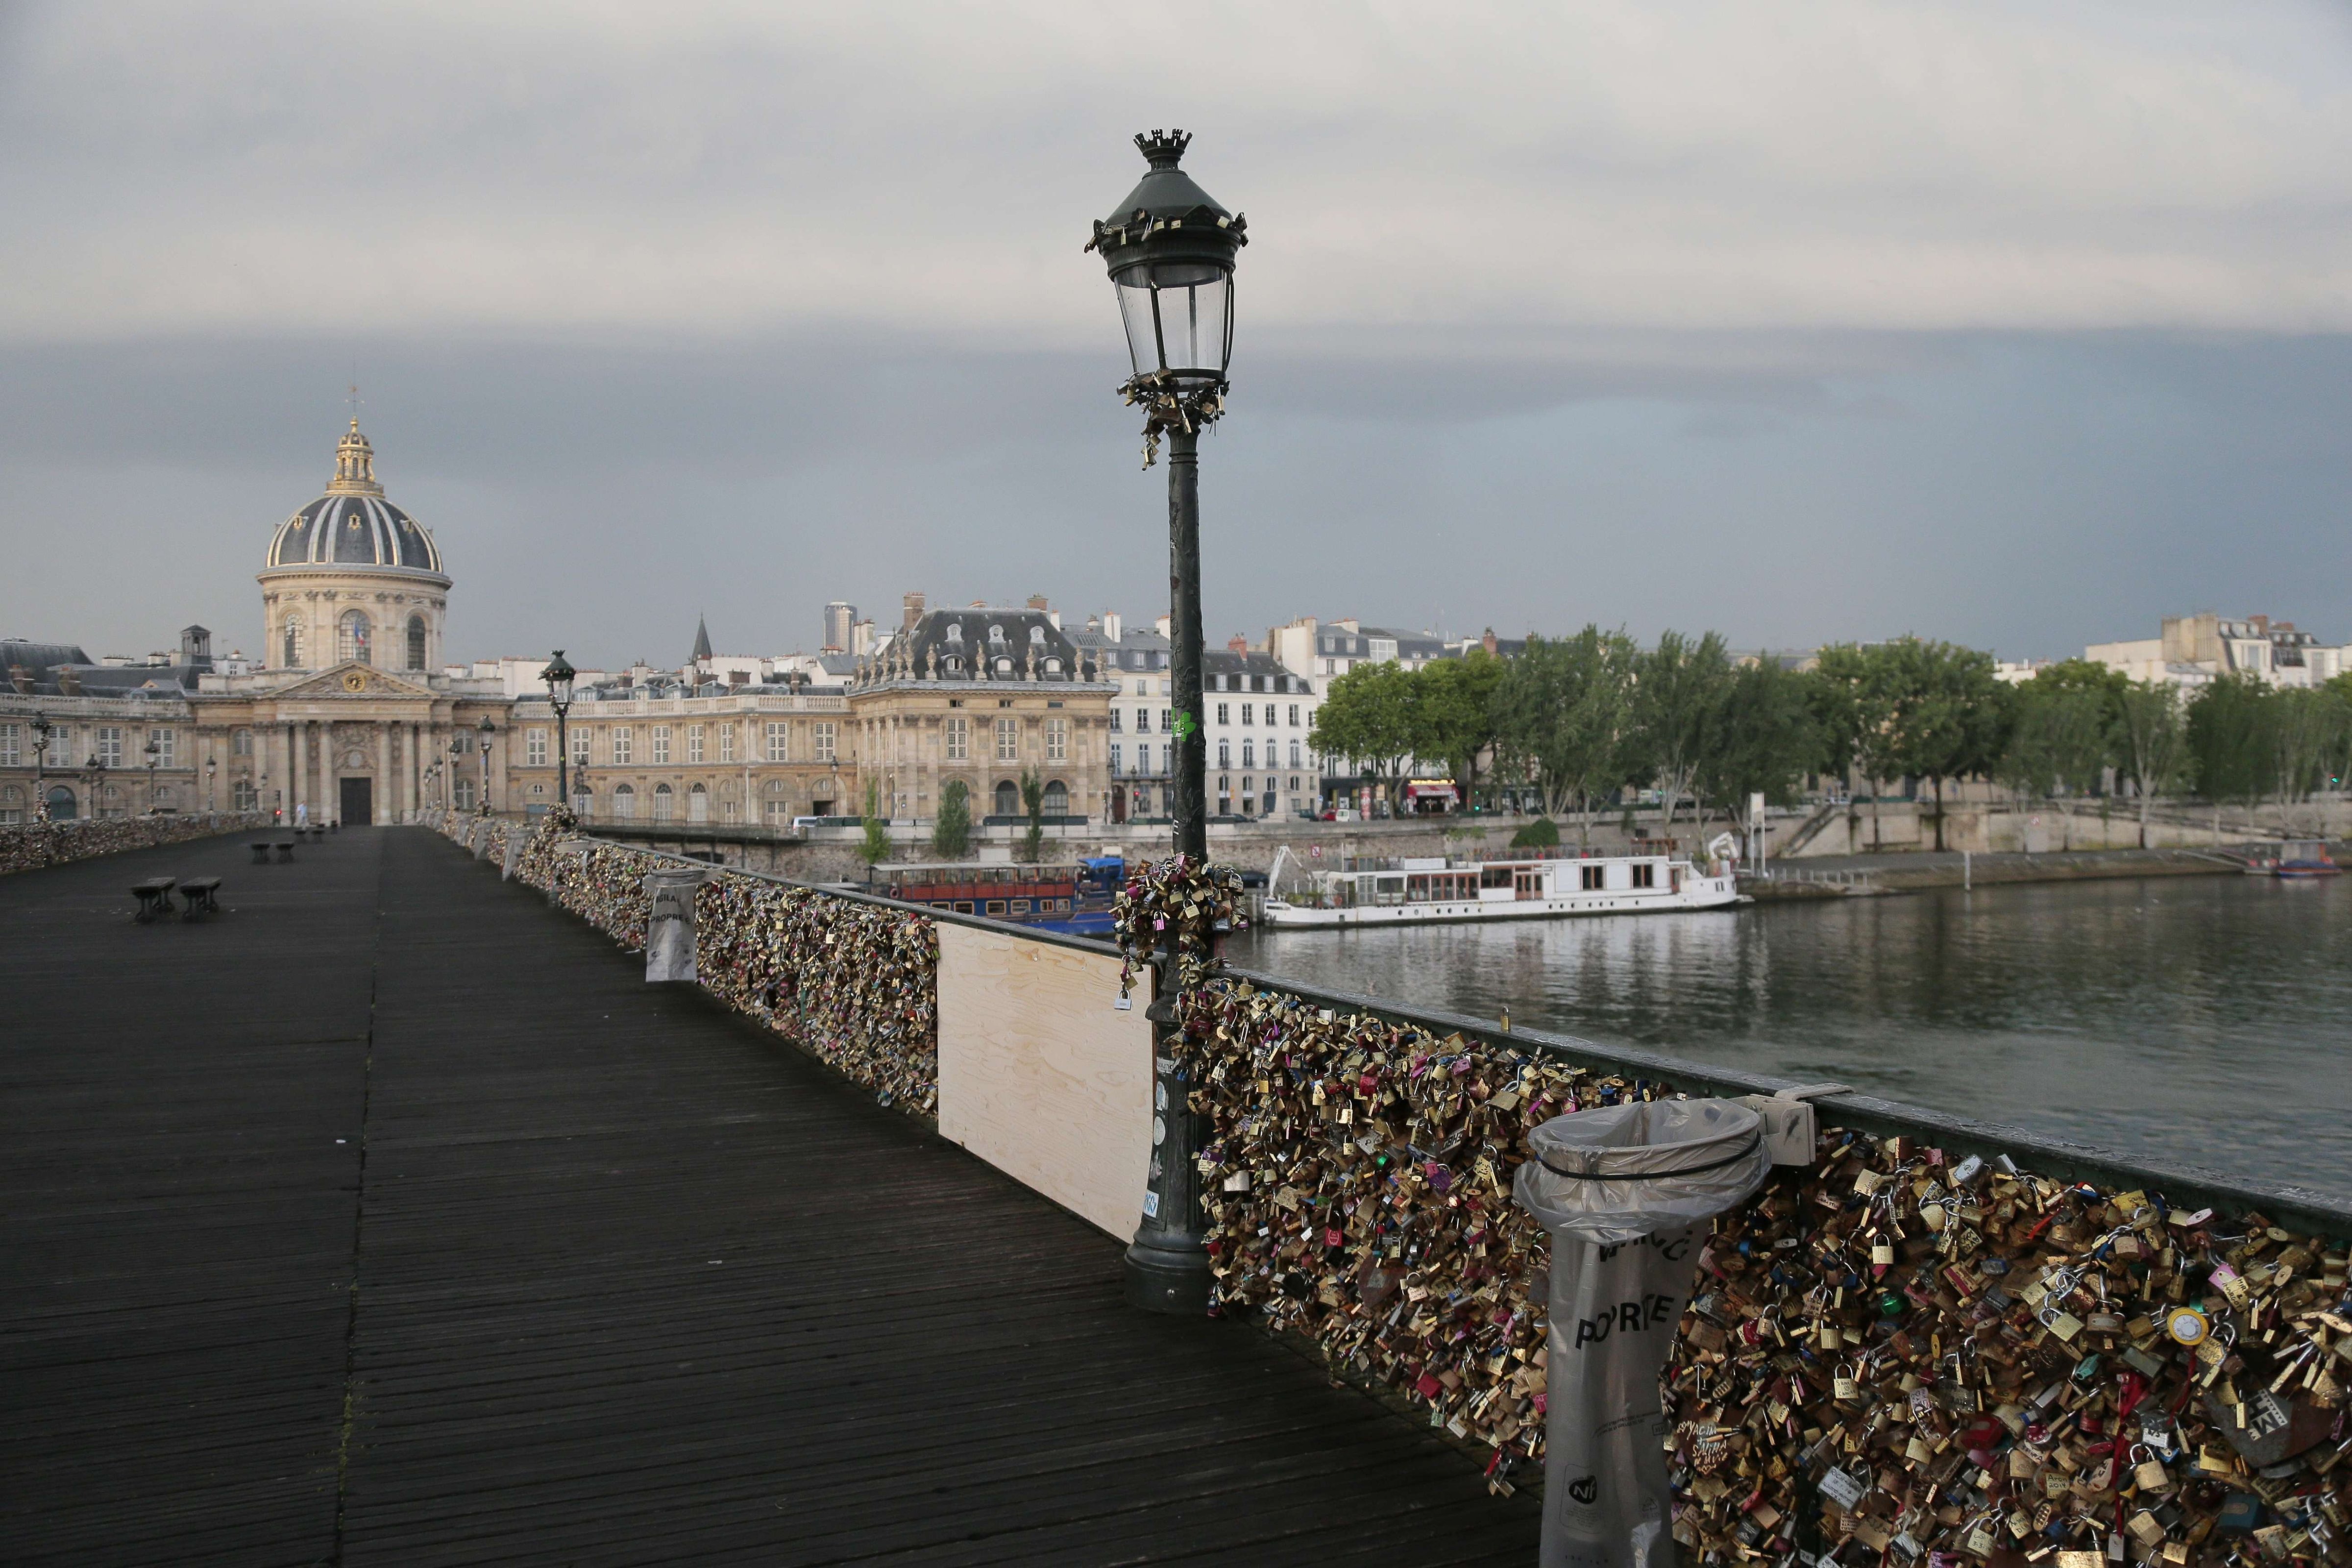 'Love padlocks' attached to a fence of the Pont des Arts bridge over the Seine river in Paris on June 9, 2014.